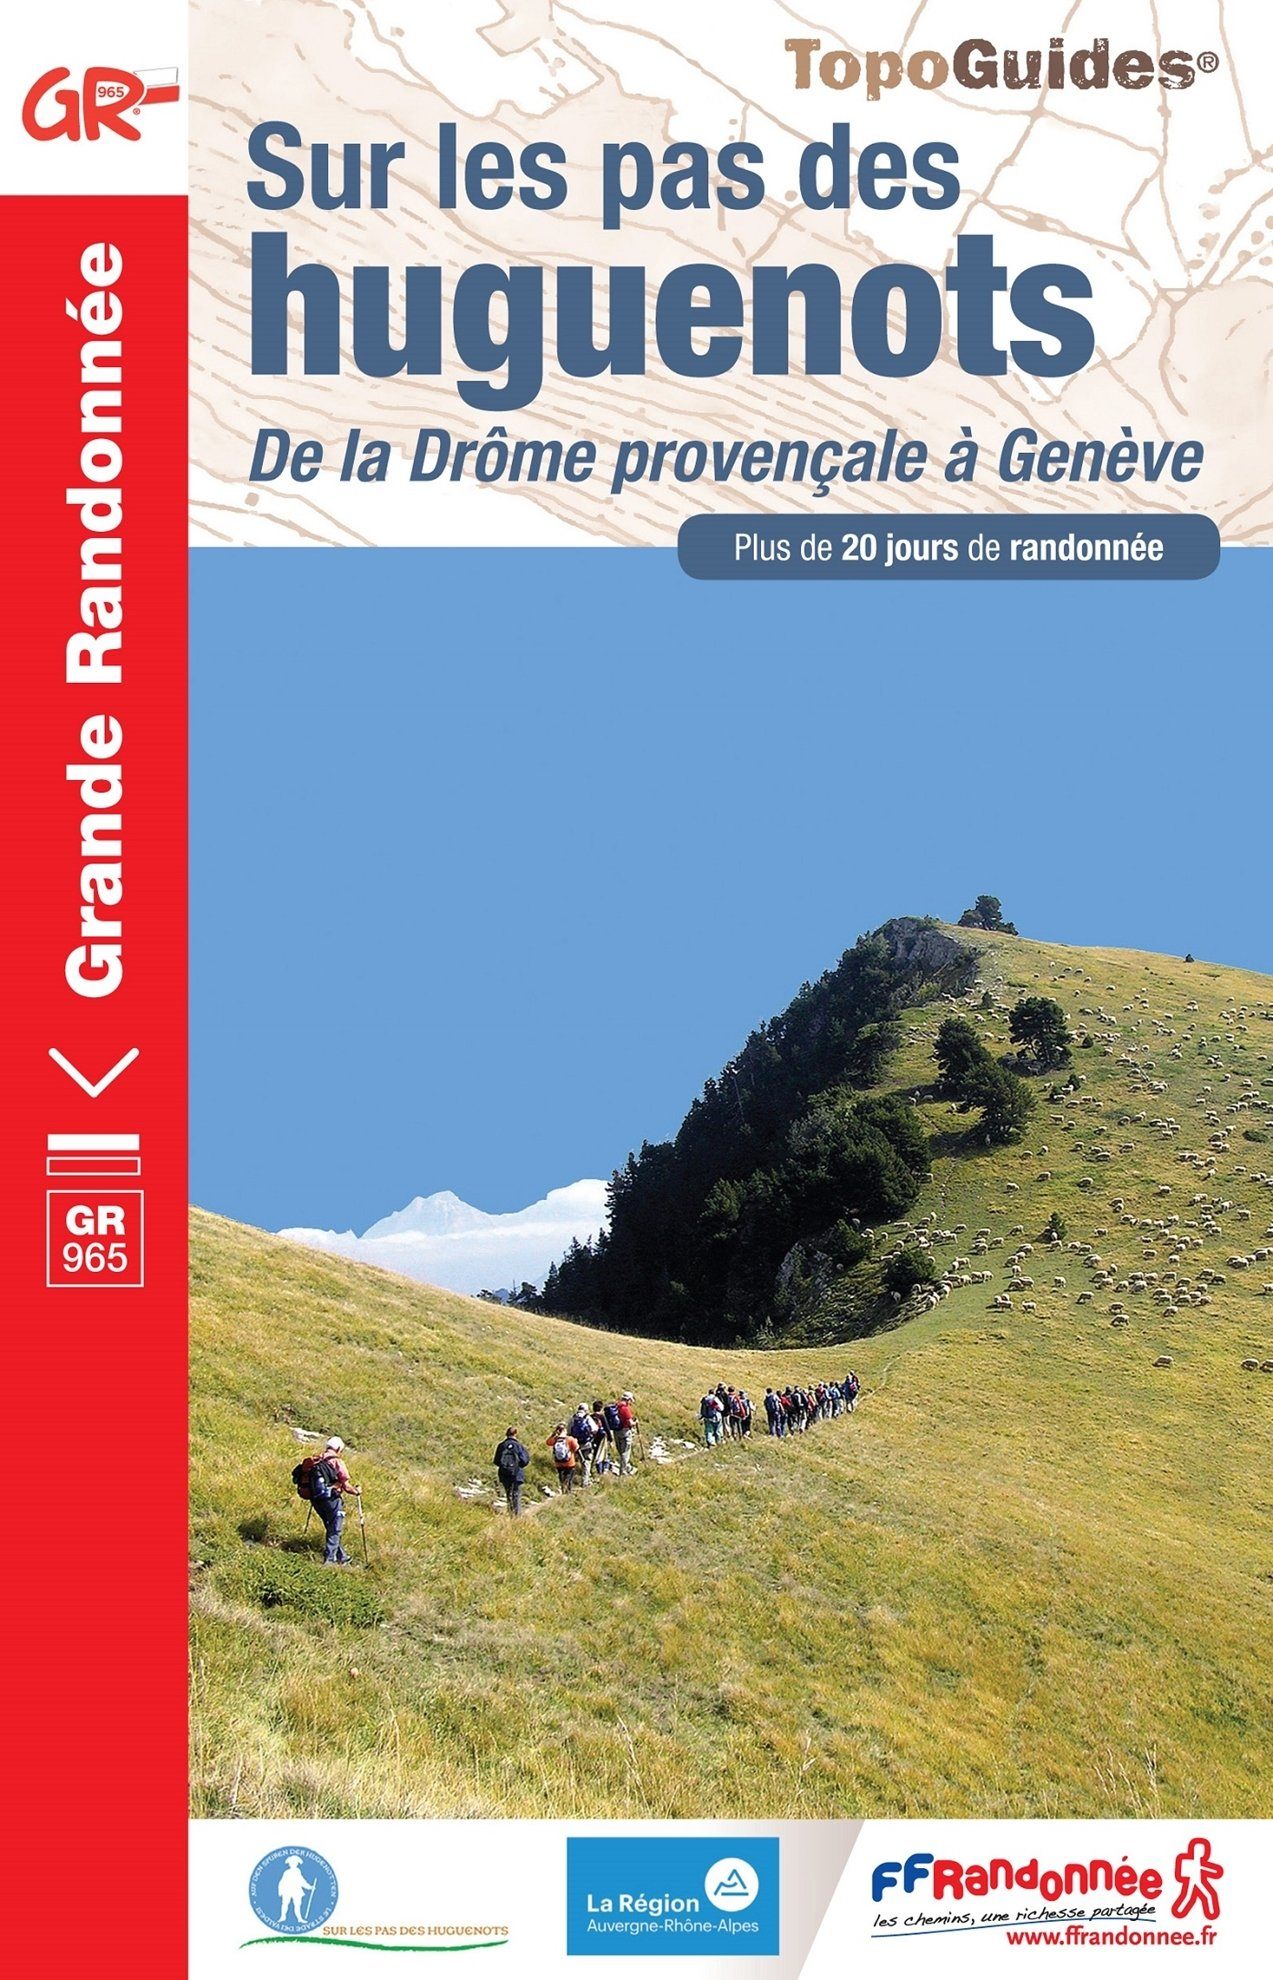 Topoguide hiking - in the footsteps of the Huguenots, Drôme Provençale ...